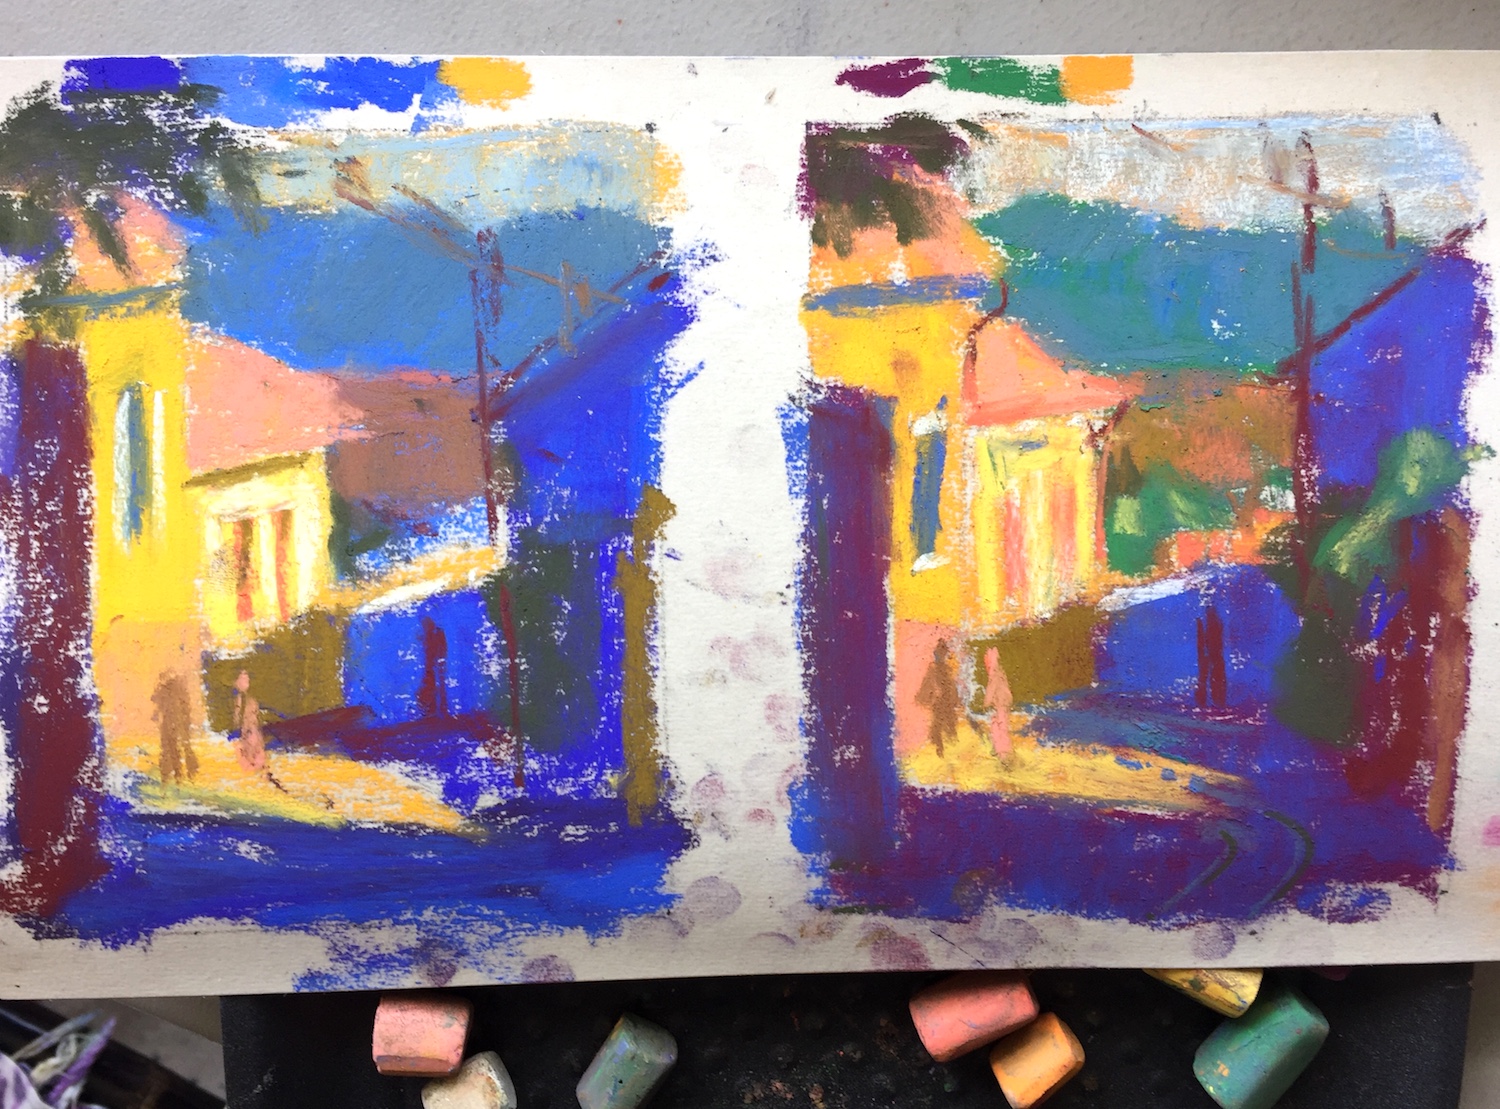 Thumbnails: The two colour studies side by side. There is a subtle difference between the two.